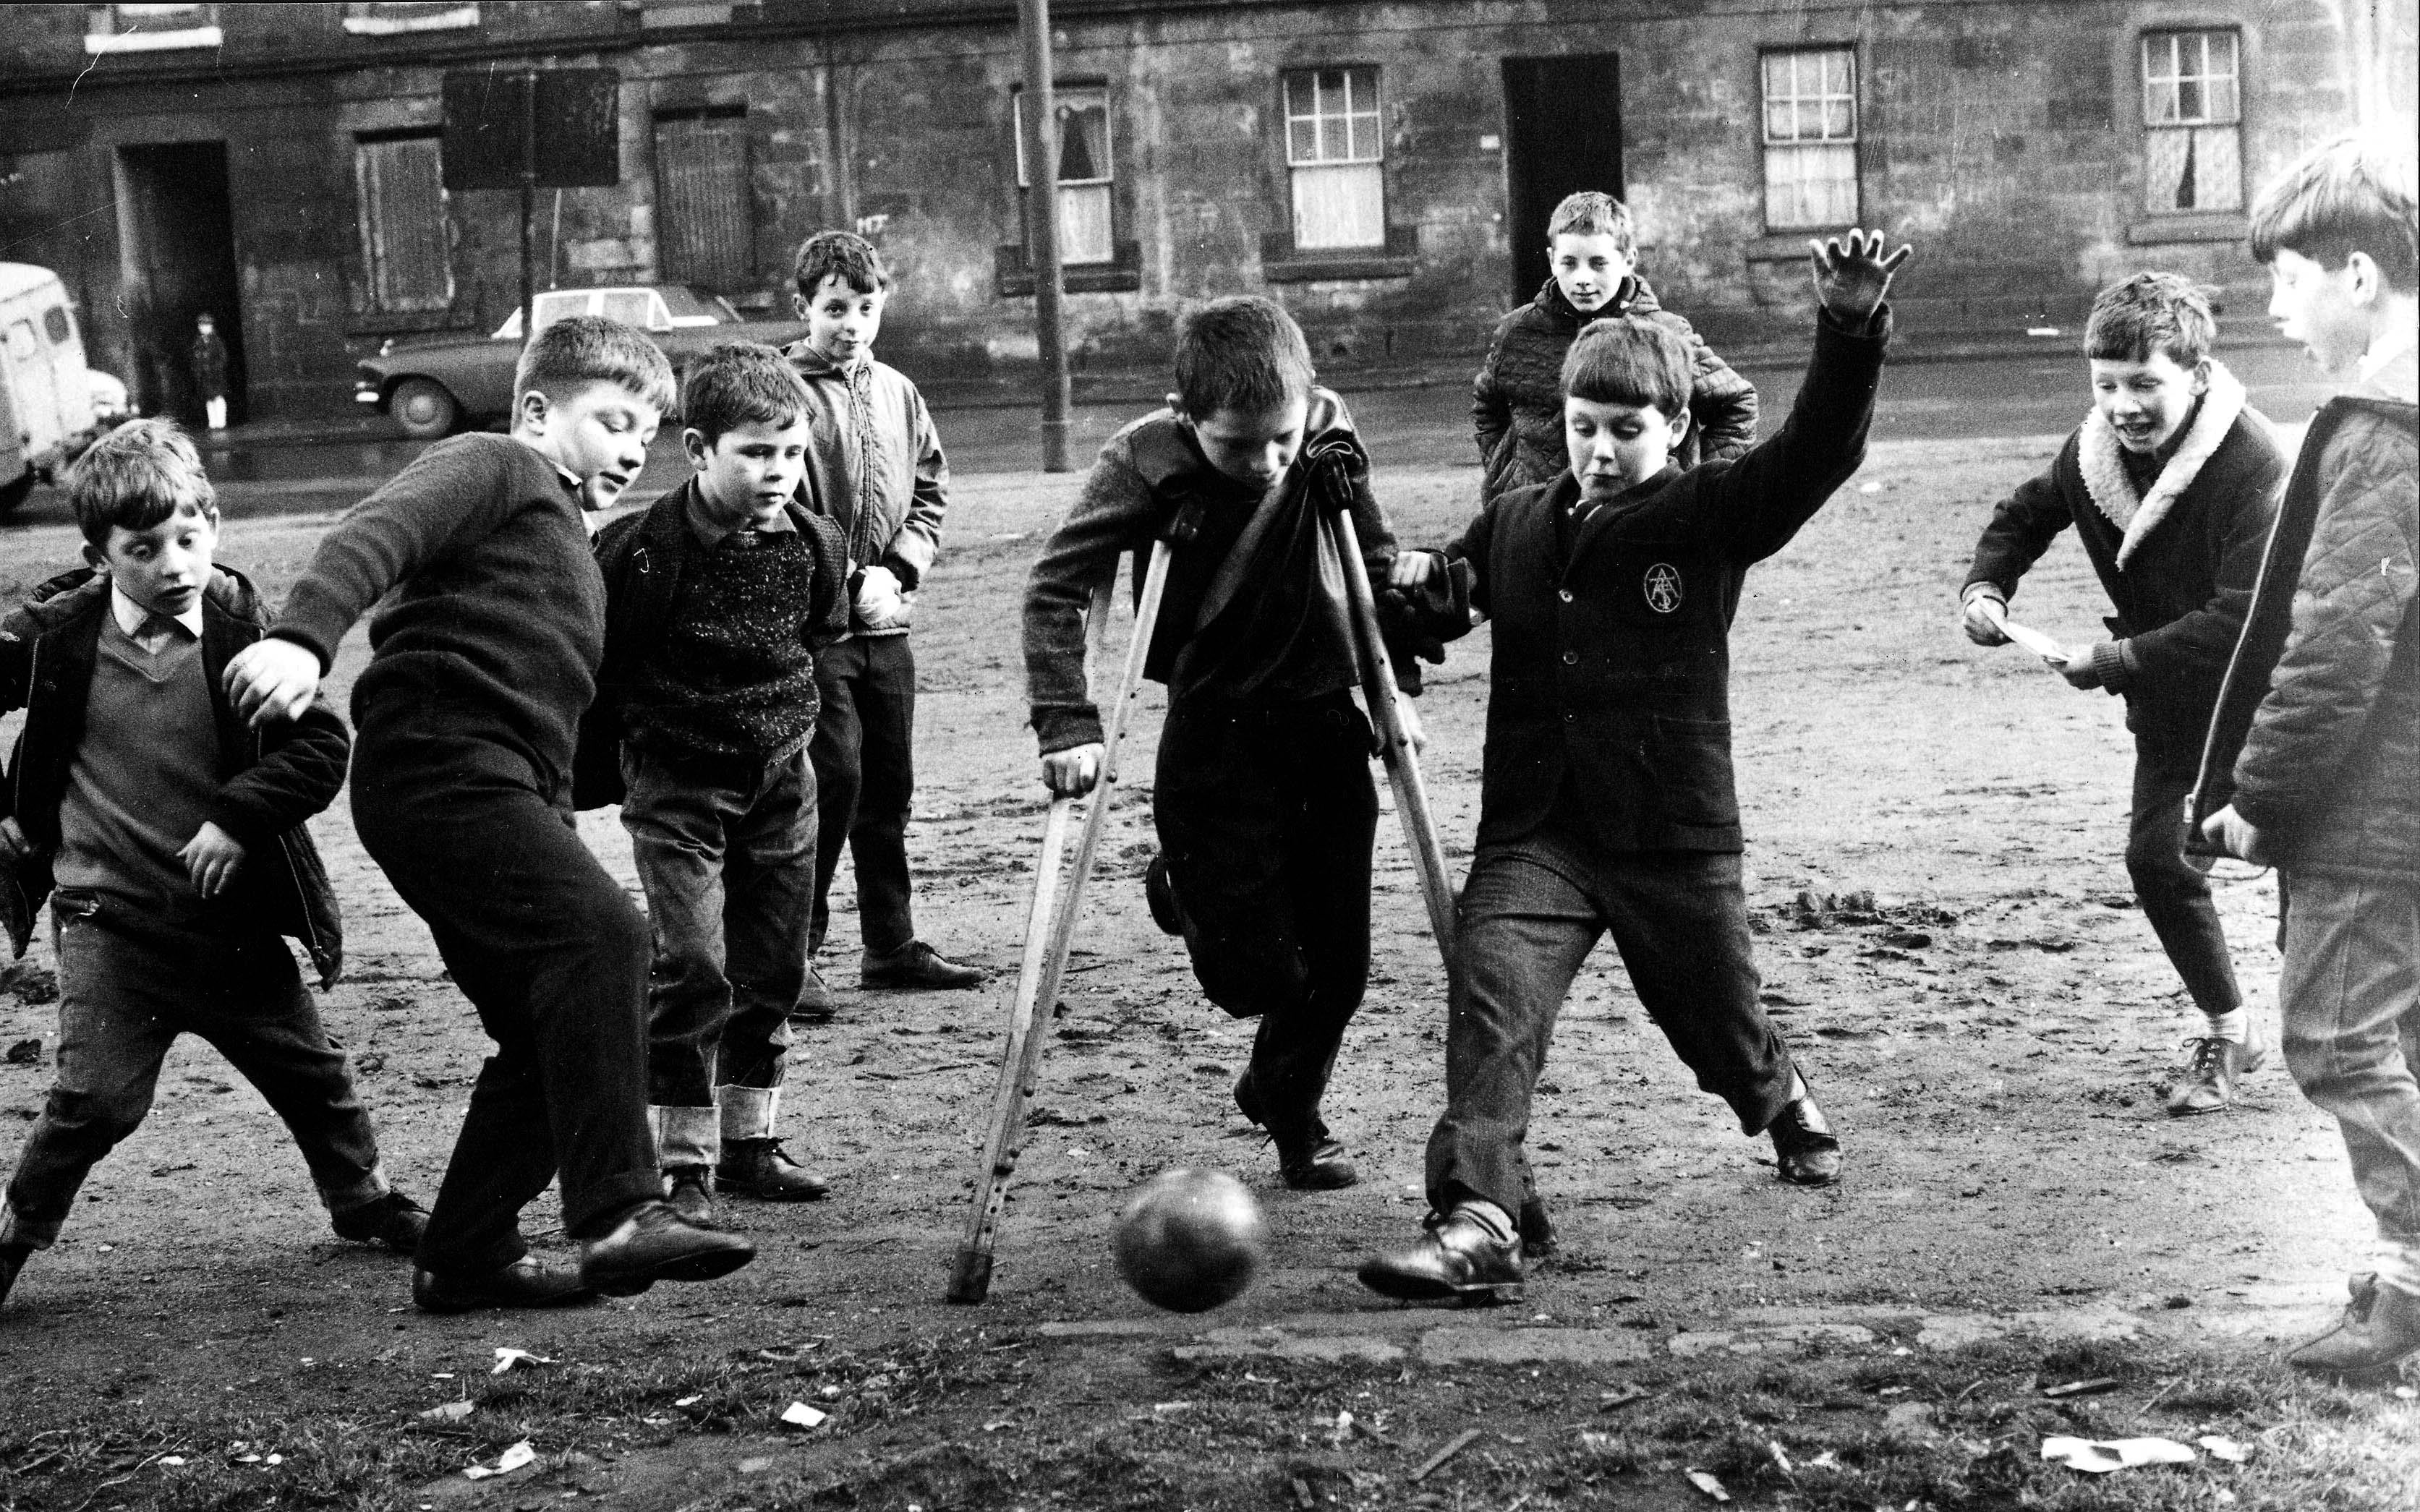 Children kick a football around in the Gorbals, Glasgow in 1967 (Popperfoto/Getty Images)